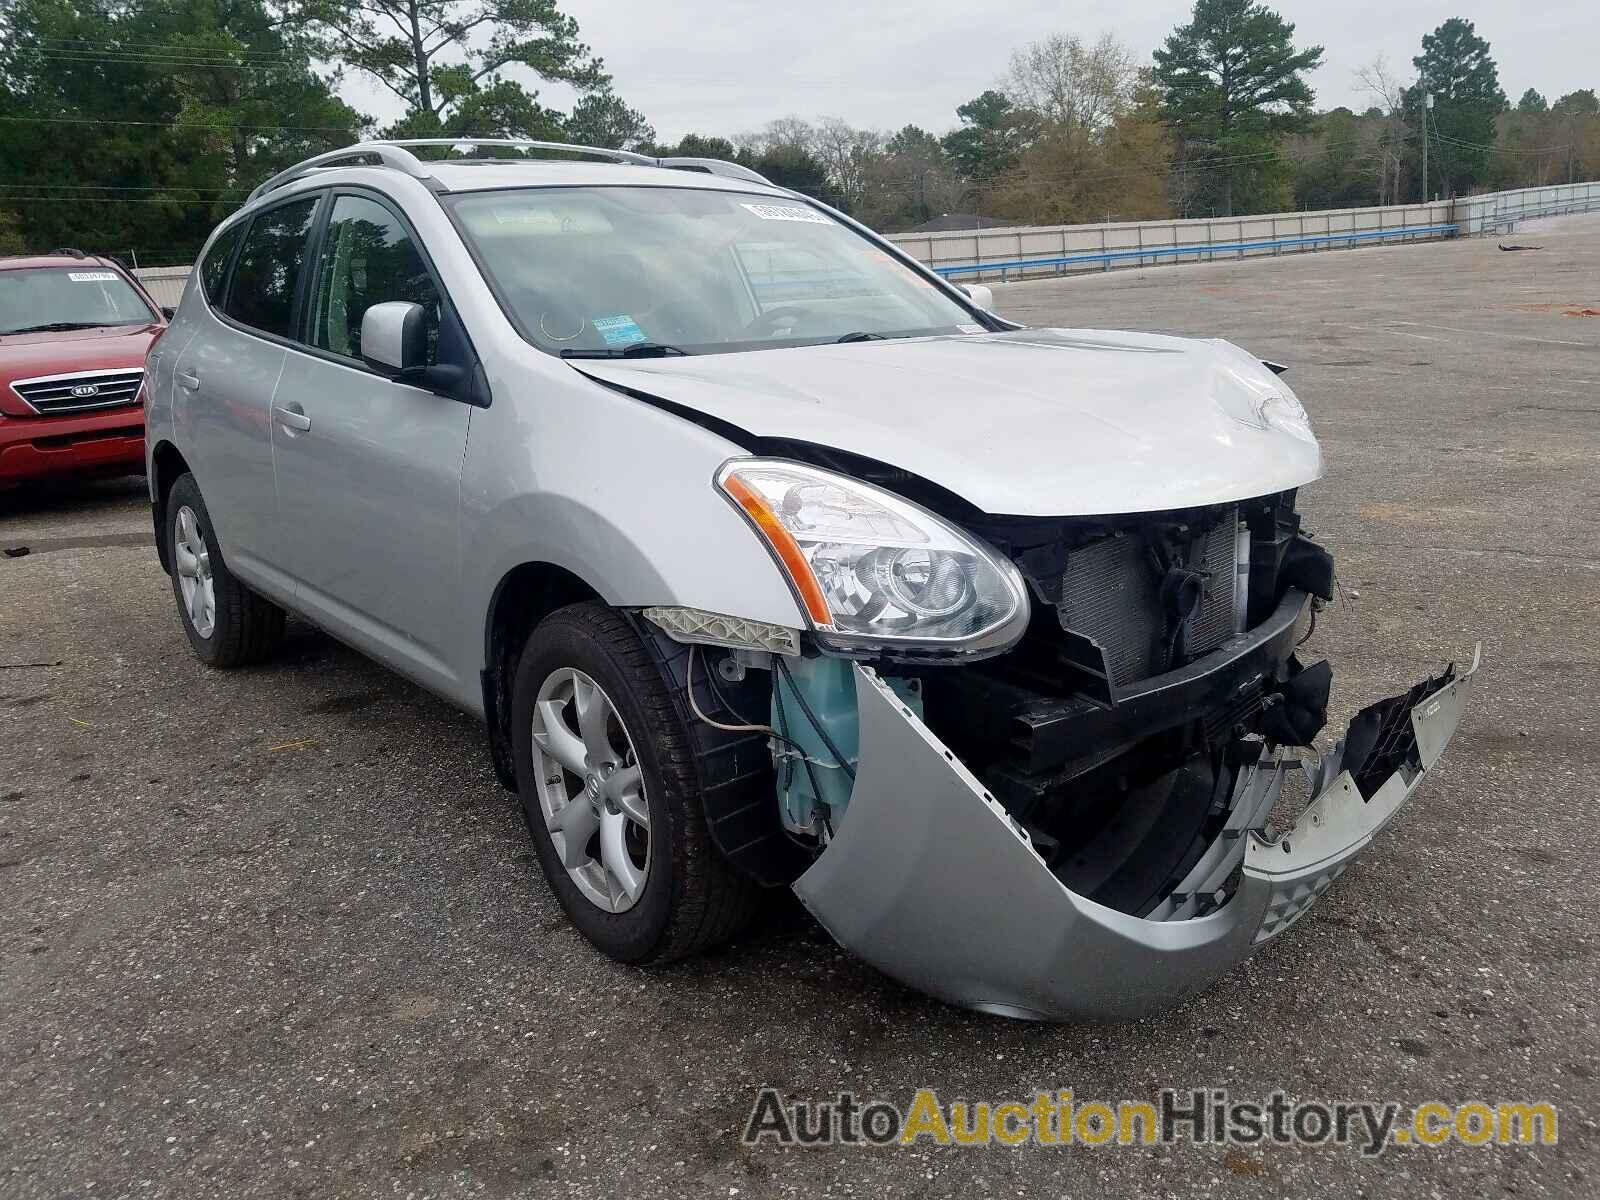 2008 NISSAN ROGUE S S, JN8AS58T38W005247